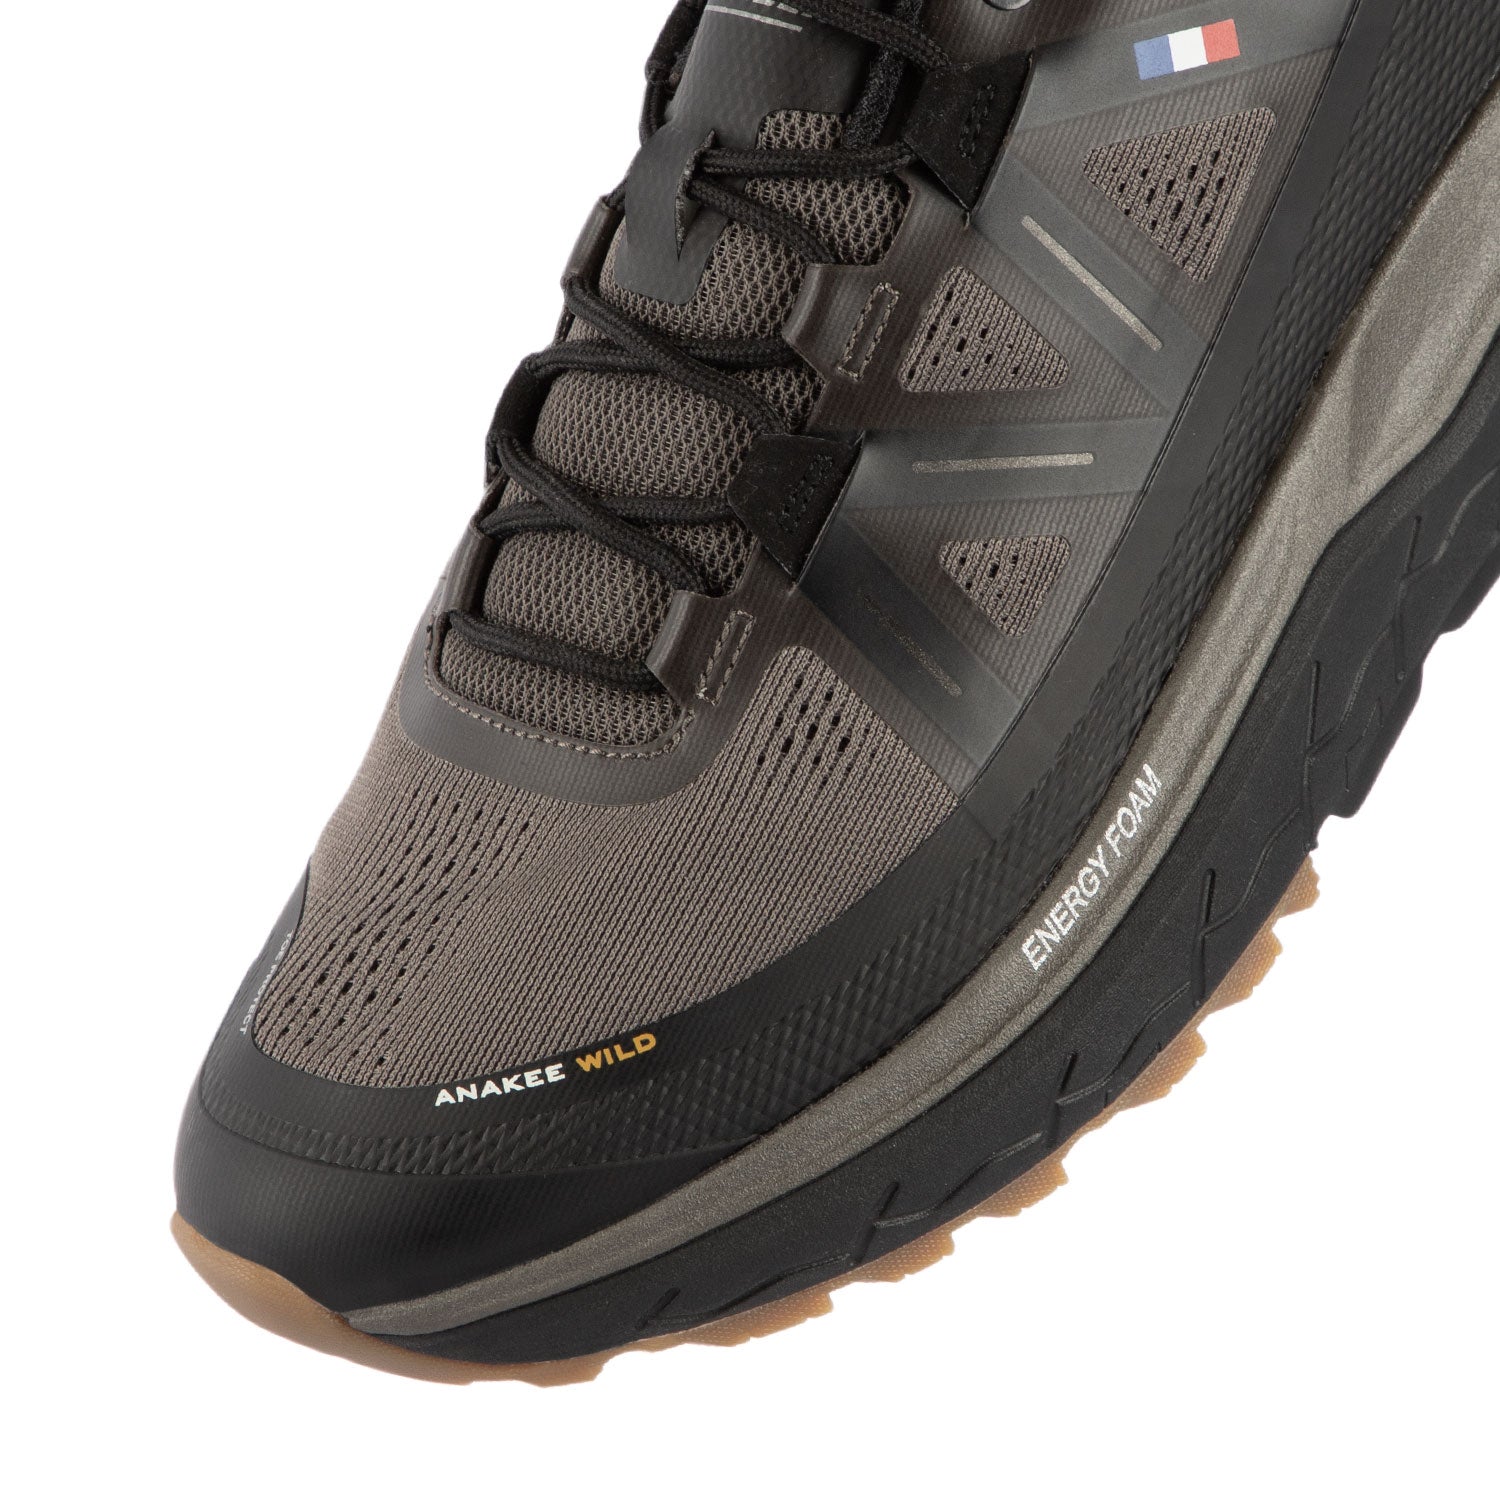 ZAPATILLA TRAIL RUNNING HOMBRE NEGRO GRIS OSCURO MICHELIN FOOTWEAR AW02